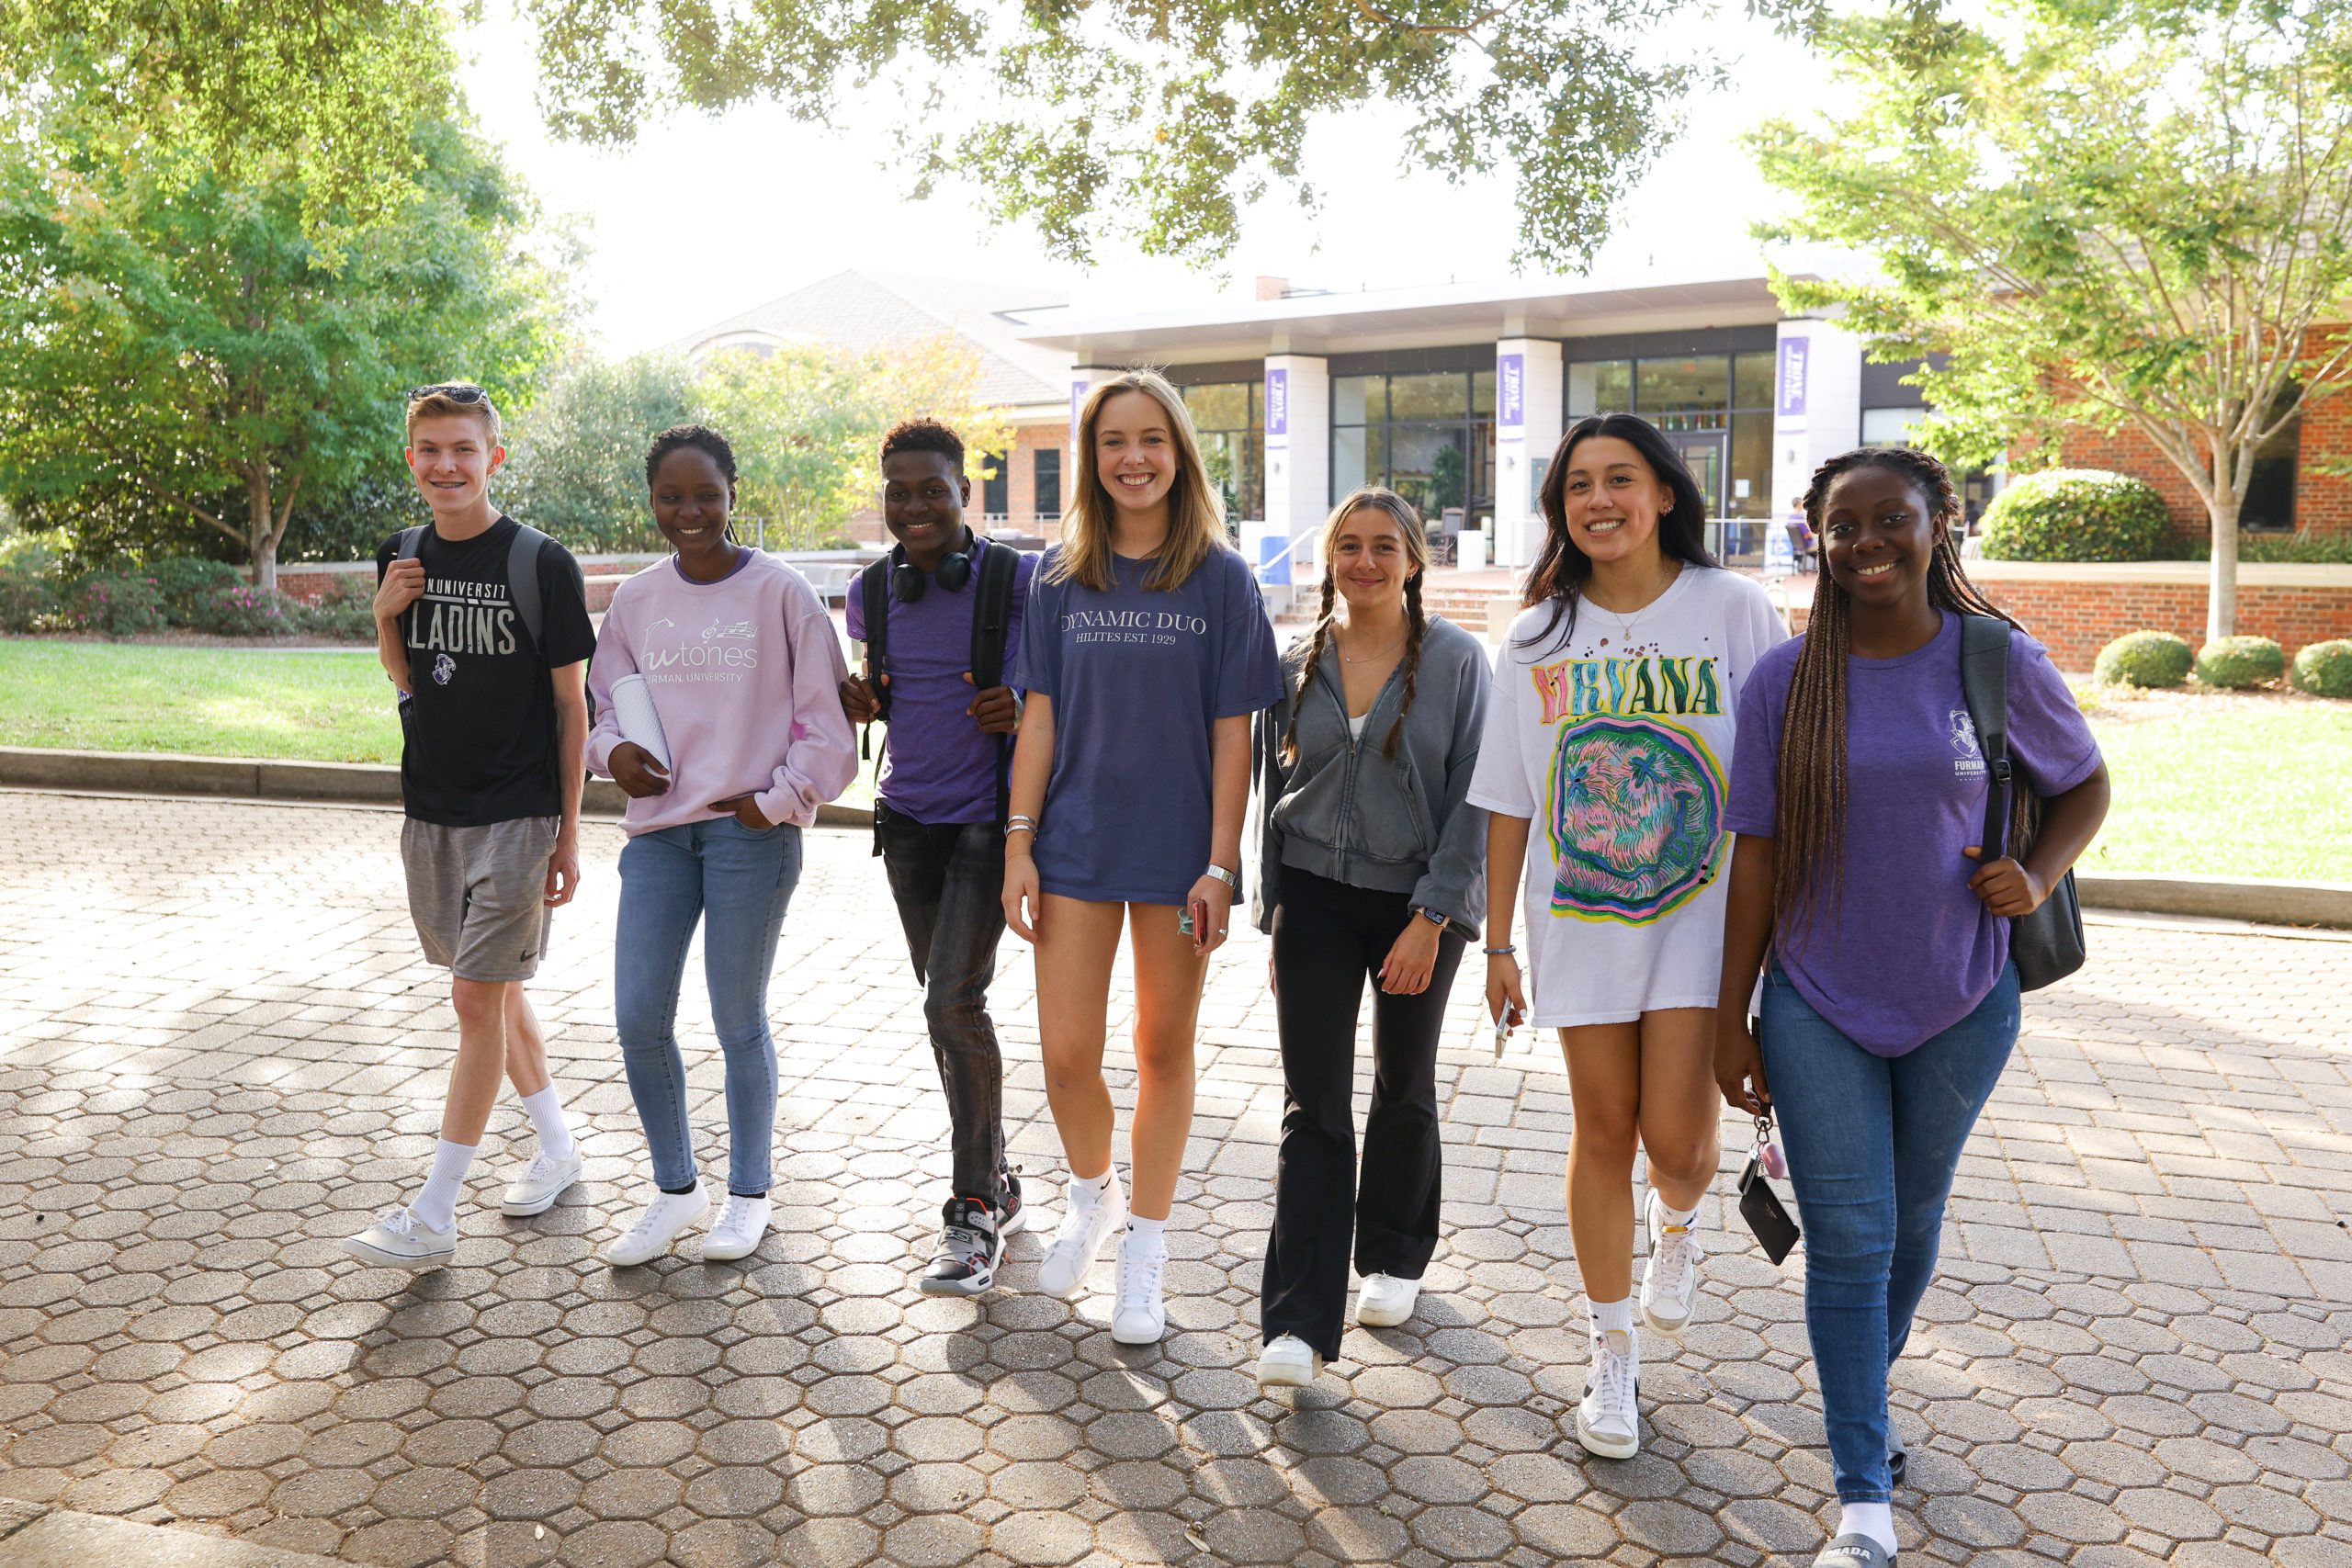 male and female students walk together on campus